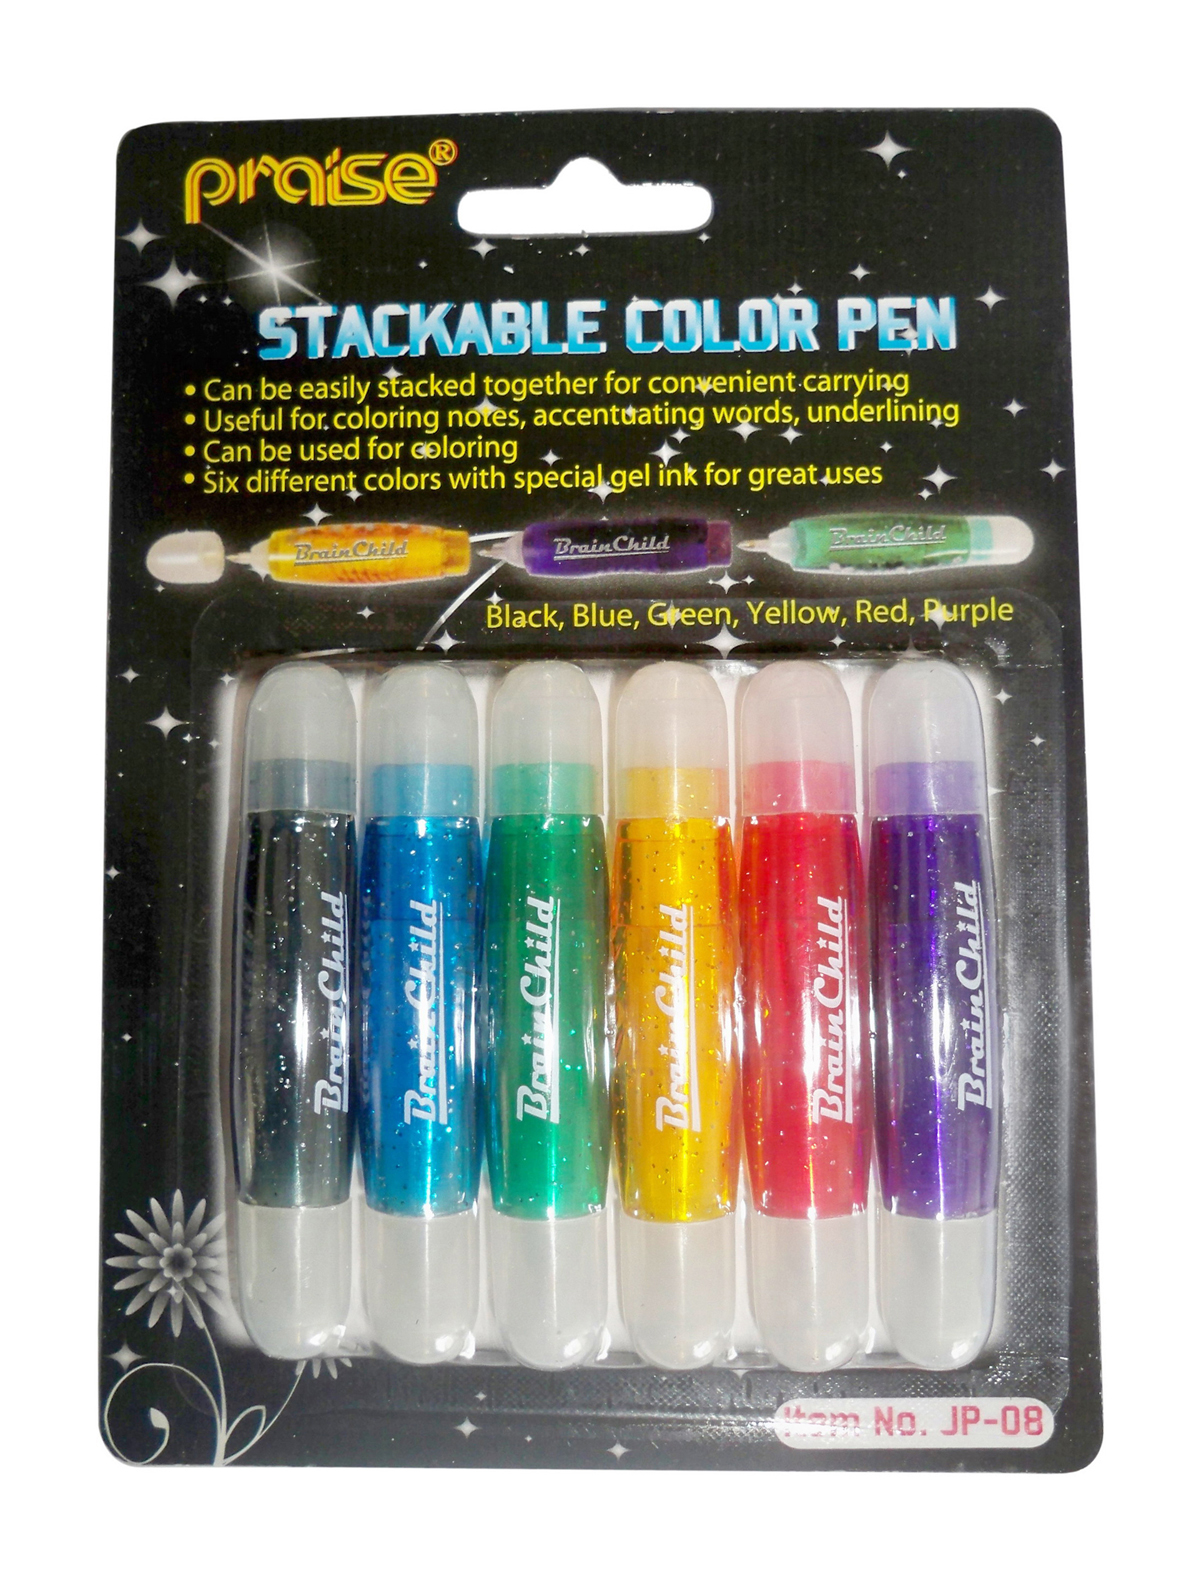 Assorted Gadget Pens - Bracelet Pens are made with flexible phthalate free plastic. This product not only offers creativities but also provides the consumer with an opportunity to signal his/her personal style. Assorted colors per inner box (black, blue, red). 9 1/4 long, 1 pc per blister pack, 24 pcs/display box, 4 display boxes per carton. US patent protected.